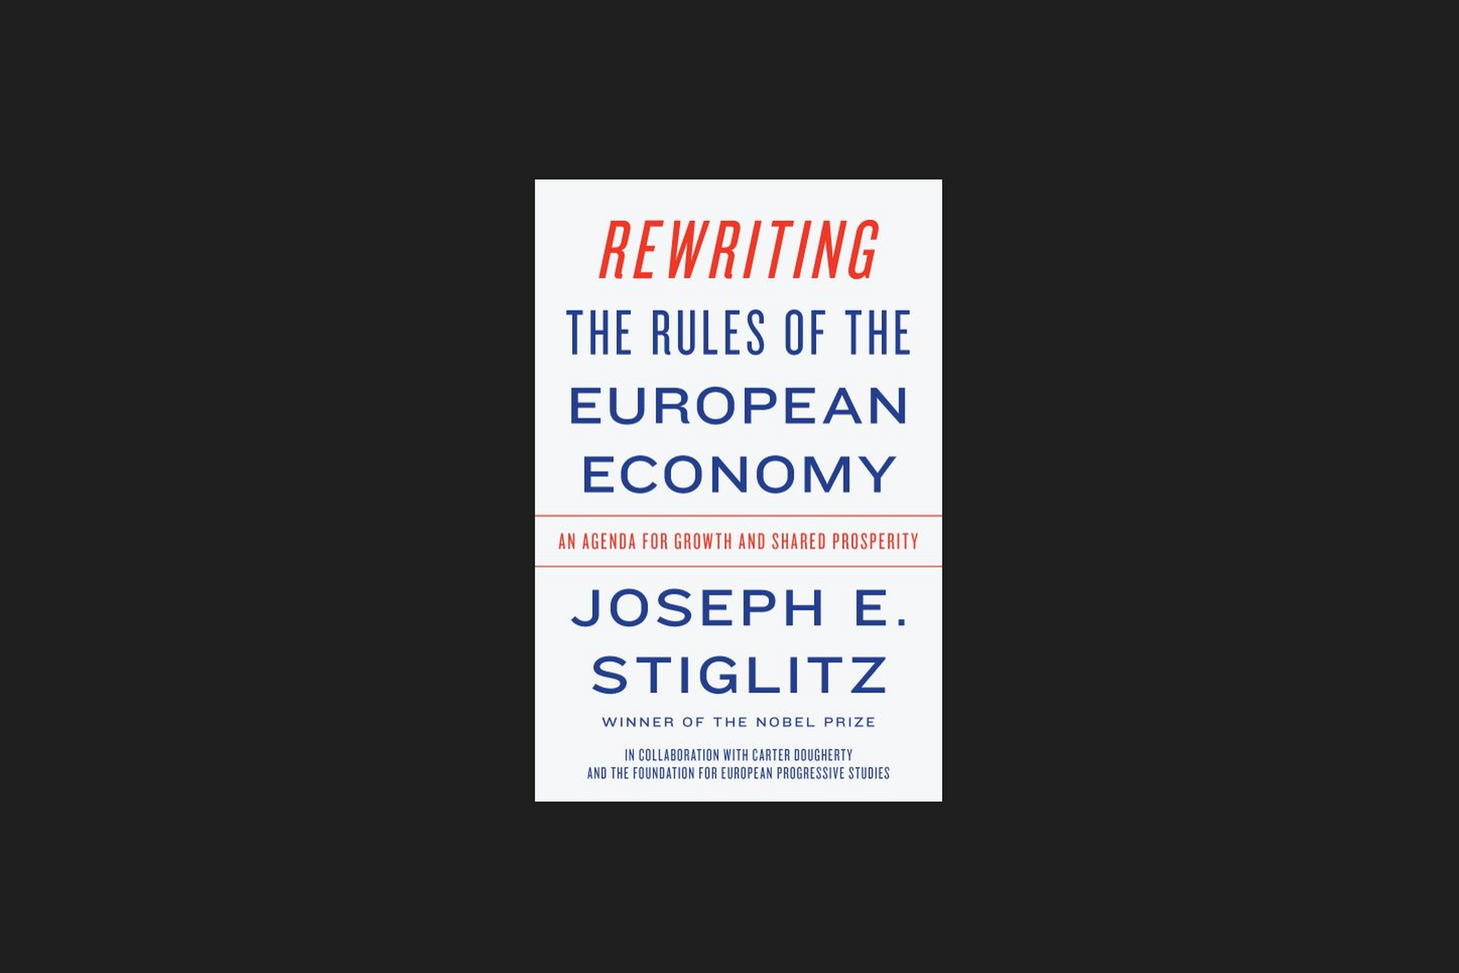 Book Image of Rewriting the Rules of the European Economy